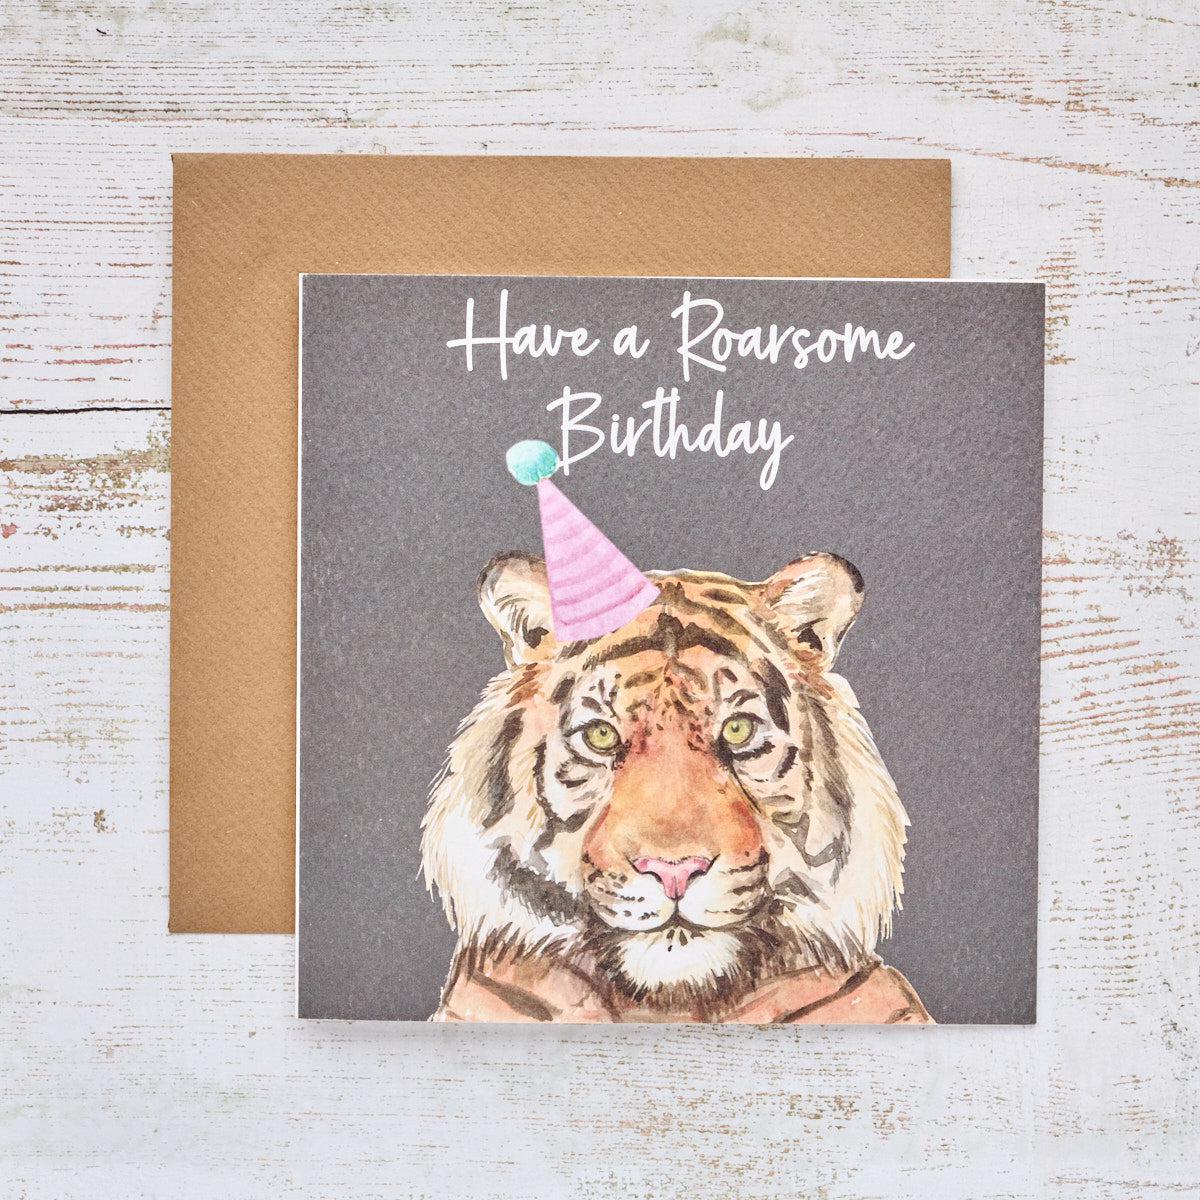 Greeting Card: “Have A Roarsome Birthday “-Breda's Gift Shop